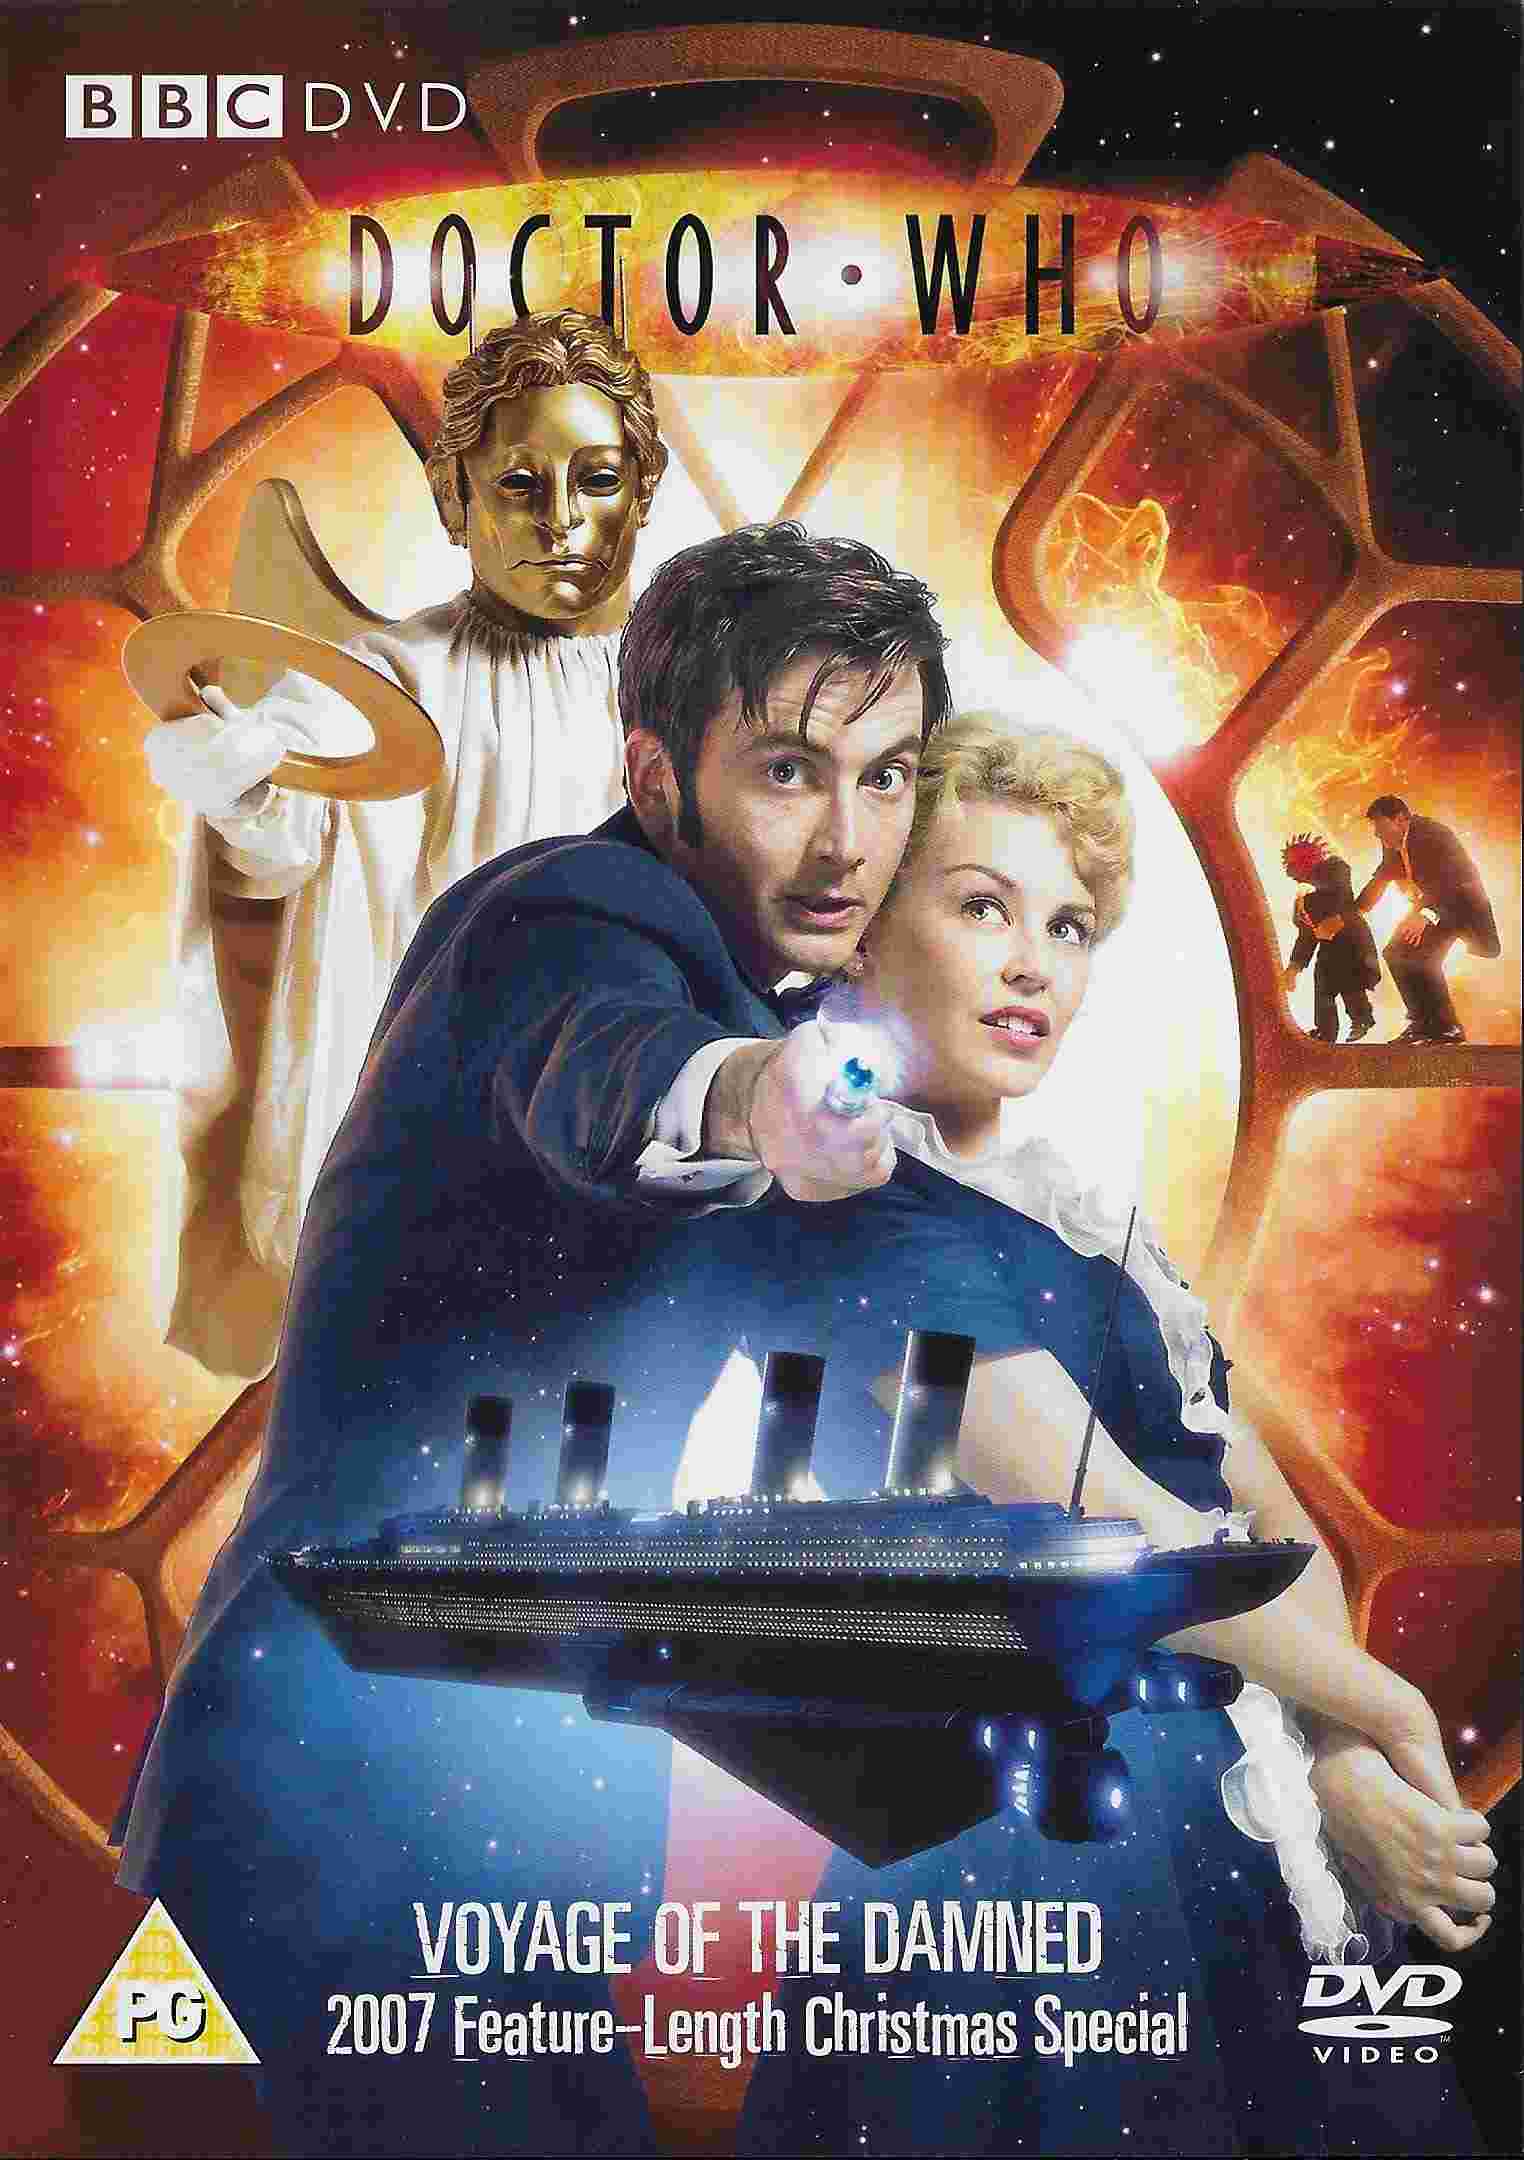 Picture of BBCDVD 2604 Doctor Who - Series 3, voyage of the damned by artist Russell T Davies from the BBC dvds - Records and Tapes library